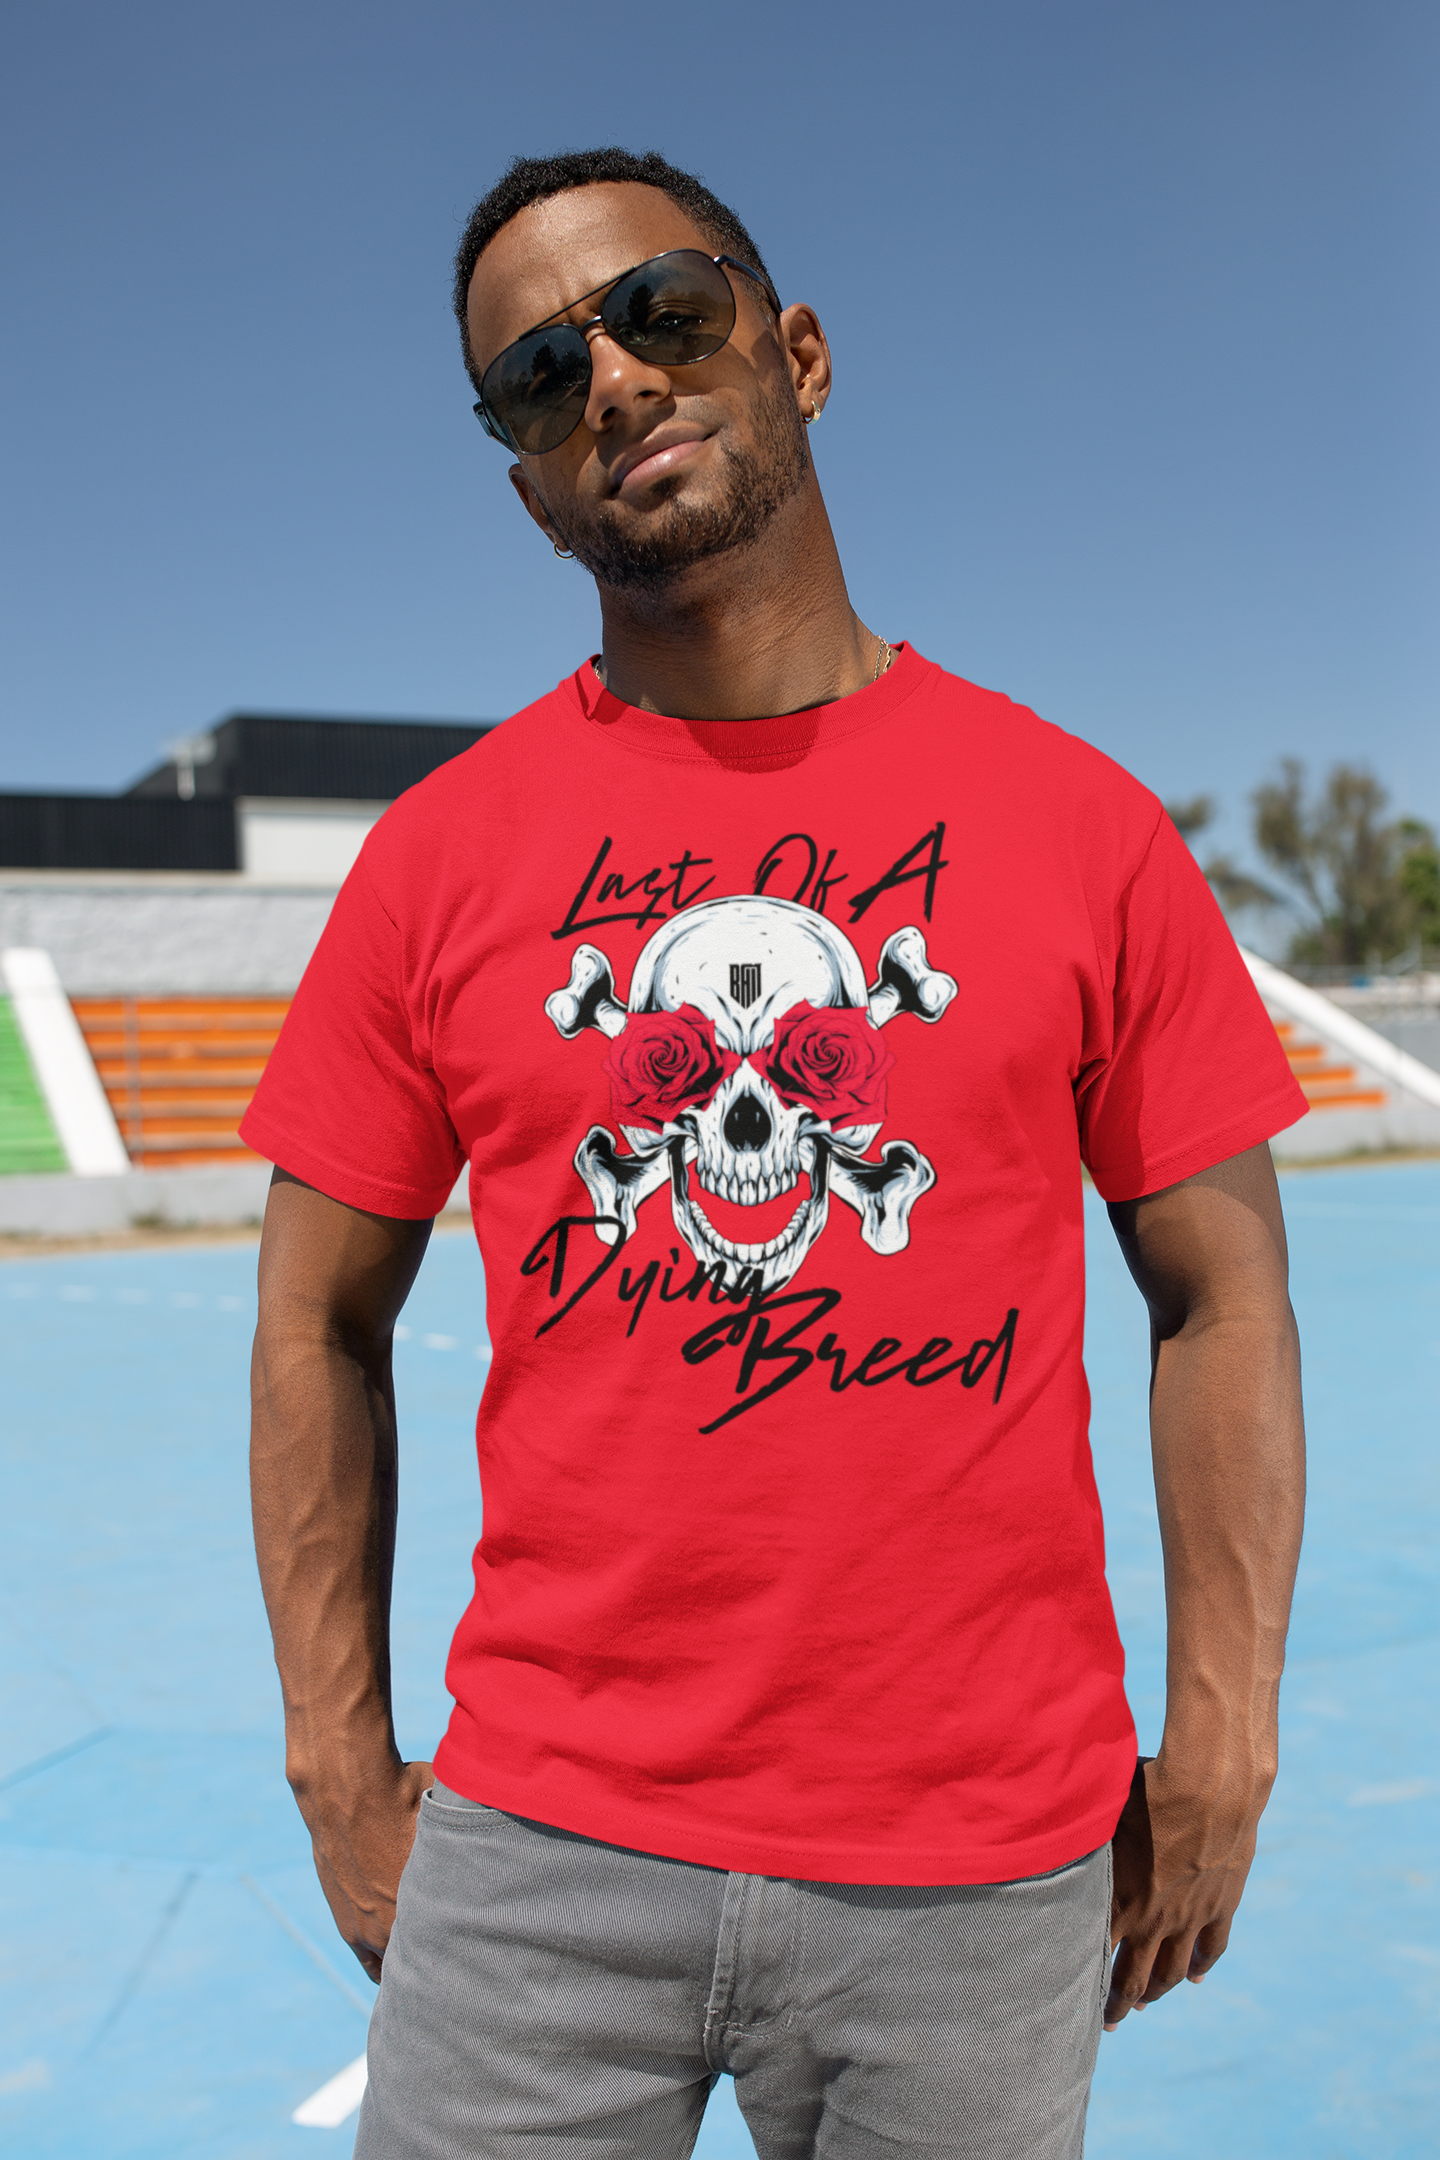 BAM Graphic Tees